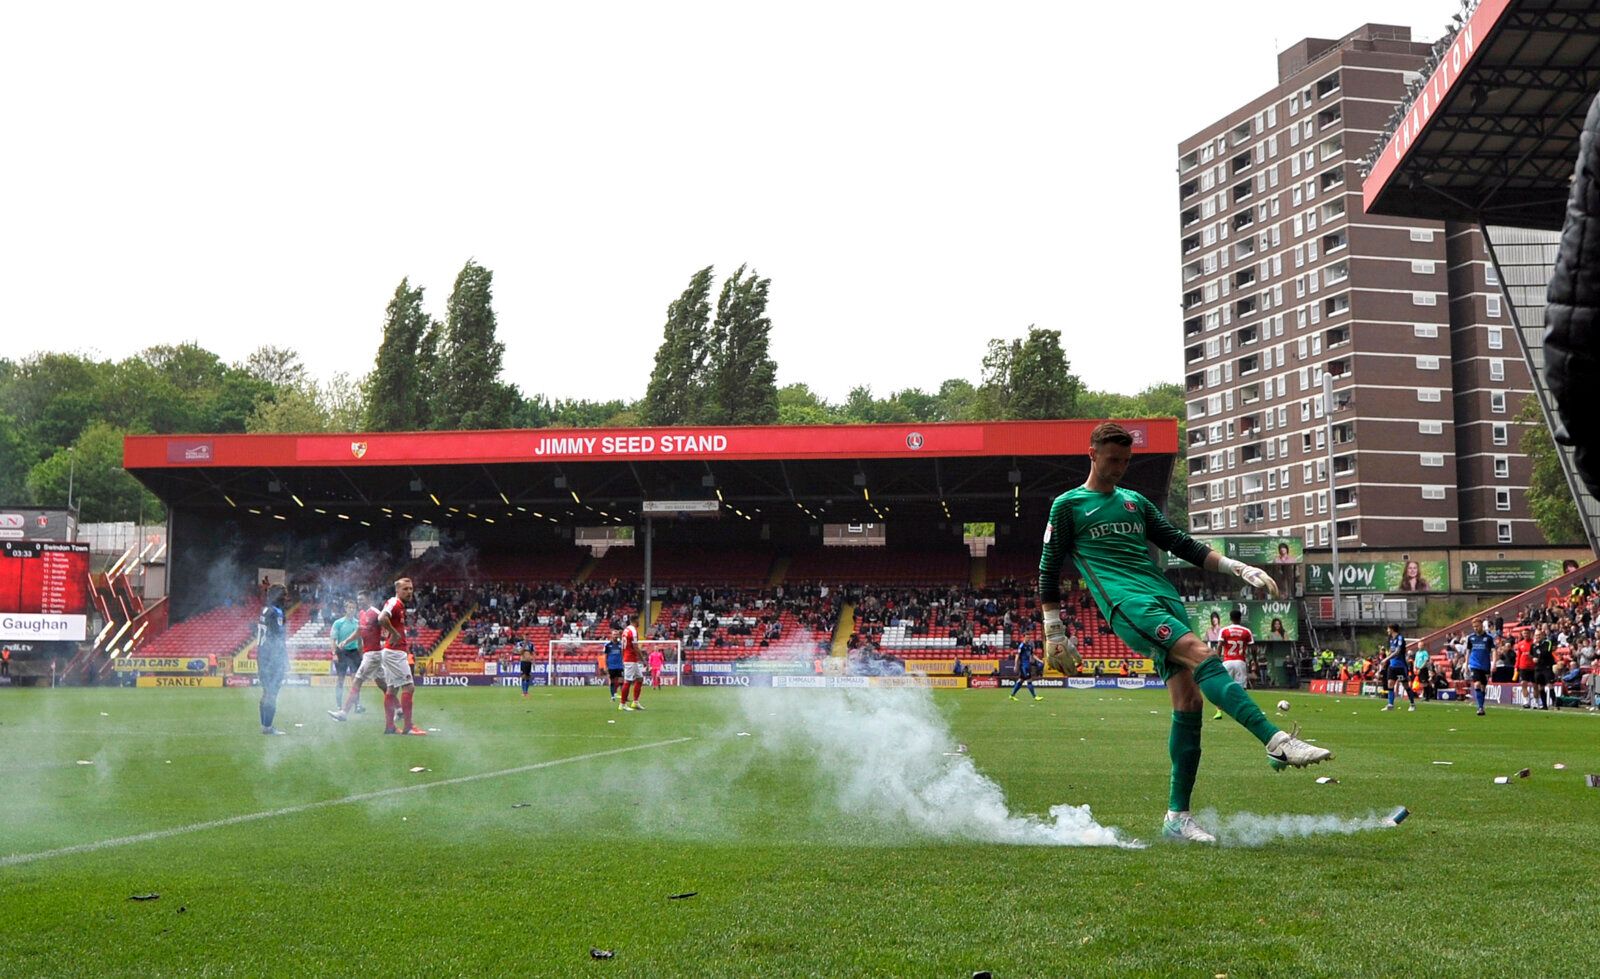 Britain Football Soccer - Charlton Athletic v Swindon Town - Sky Bet League One - The Valley - 30/4/17 Charlton Athletic's Declan Rudd clears a flare as fans protest with balloons and flares against owner Roland Duchatelet before the game Mandatory Credit: Action Images / Adam Holt Livepic EDITORIAL USE ONLY. No use with unauthorized audio, video, data, fixture lists, club/league logos or 